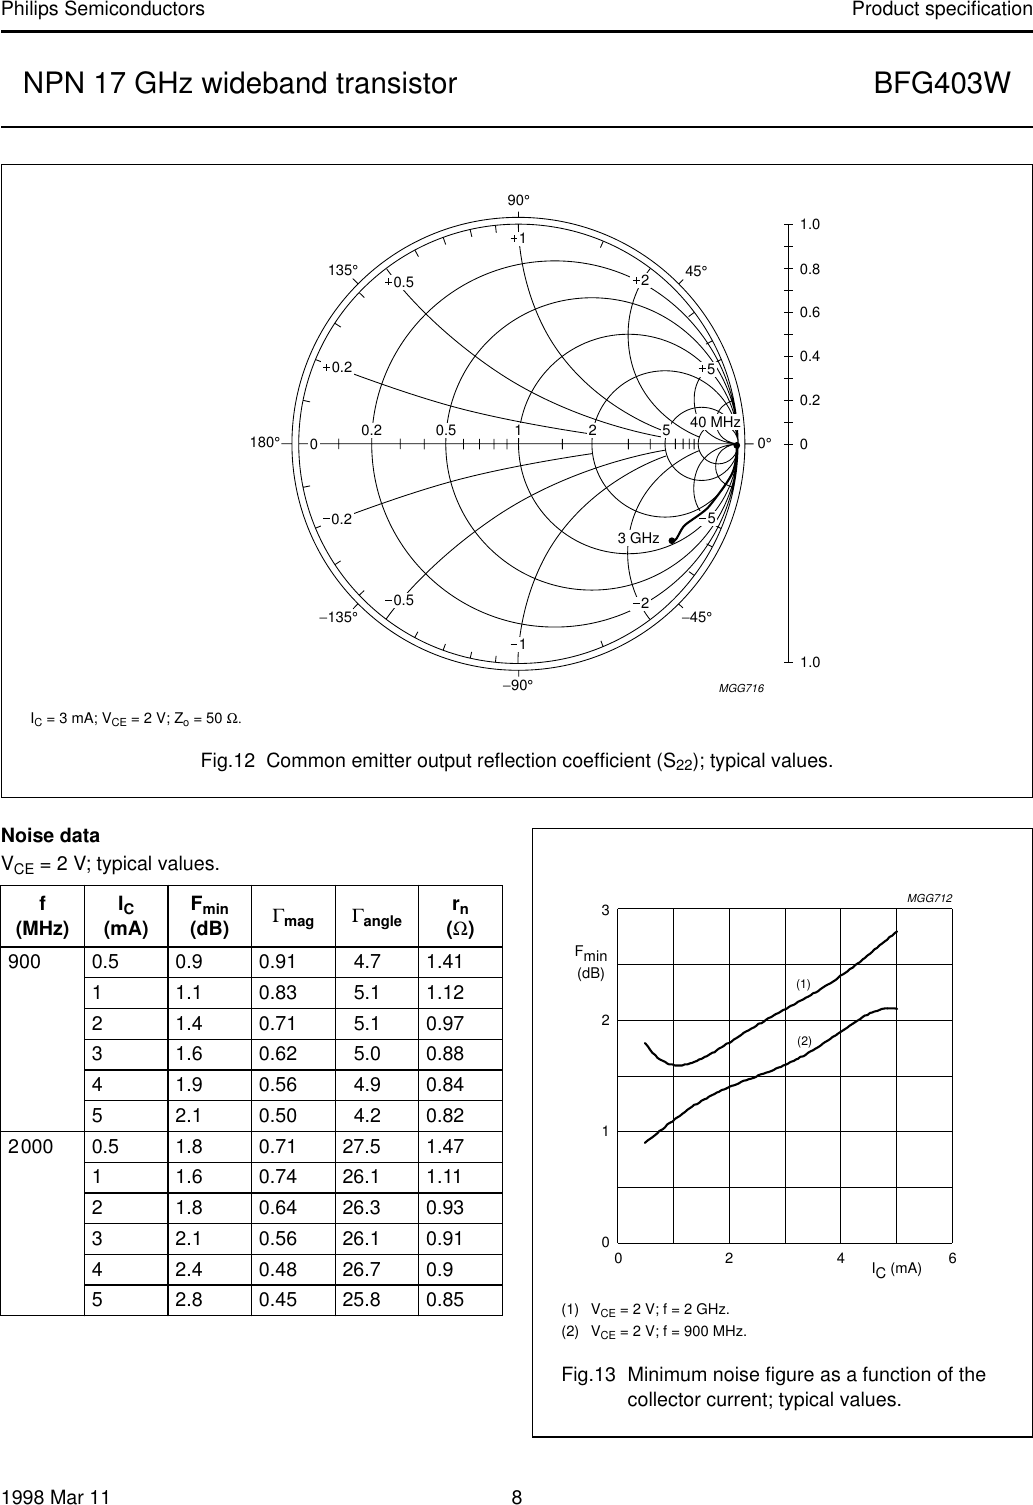 Page 8 of 12 - NPN 17 GHz Wideband Transistor Bfg403w Philips